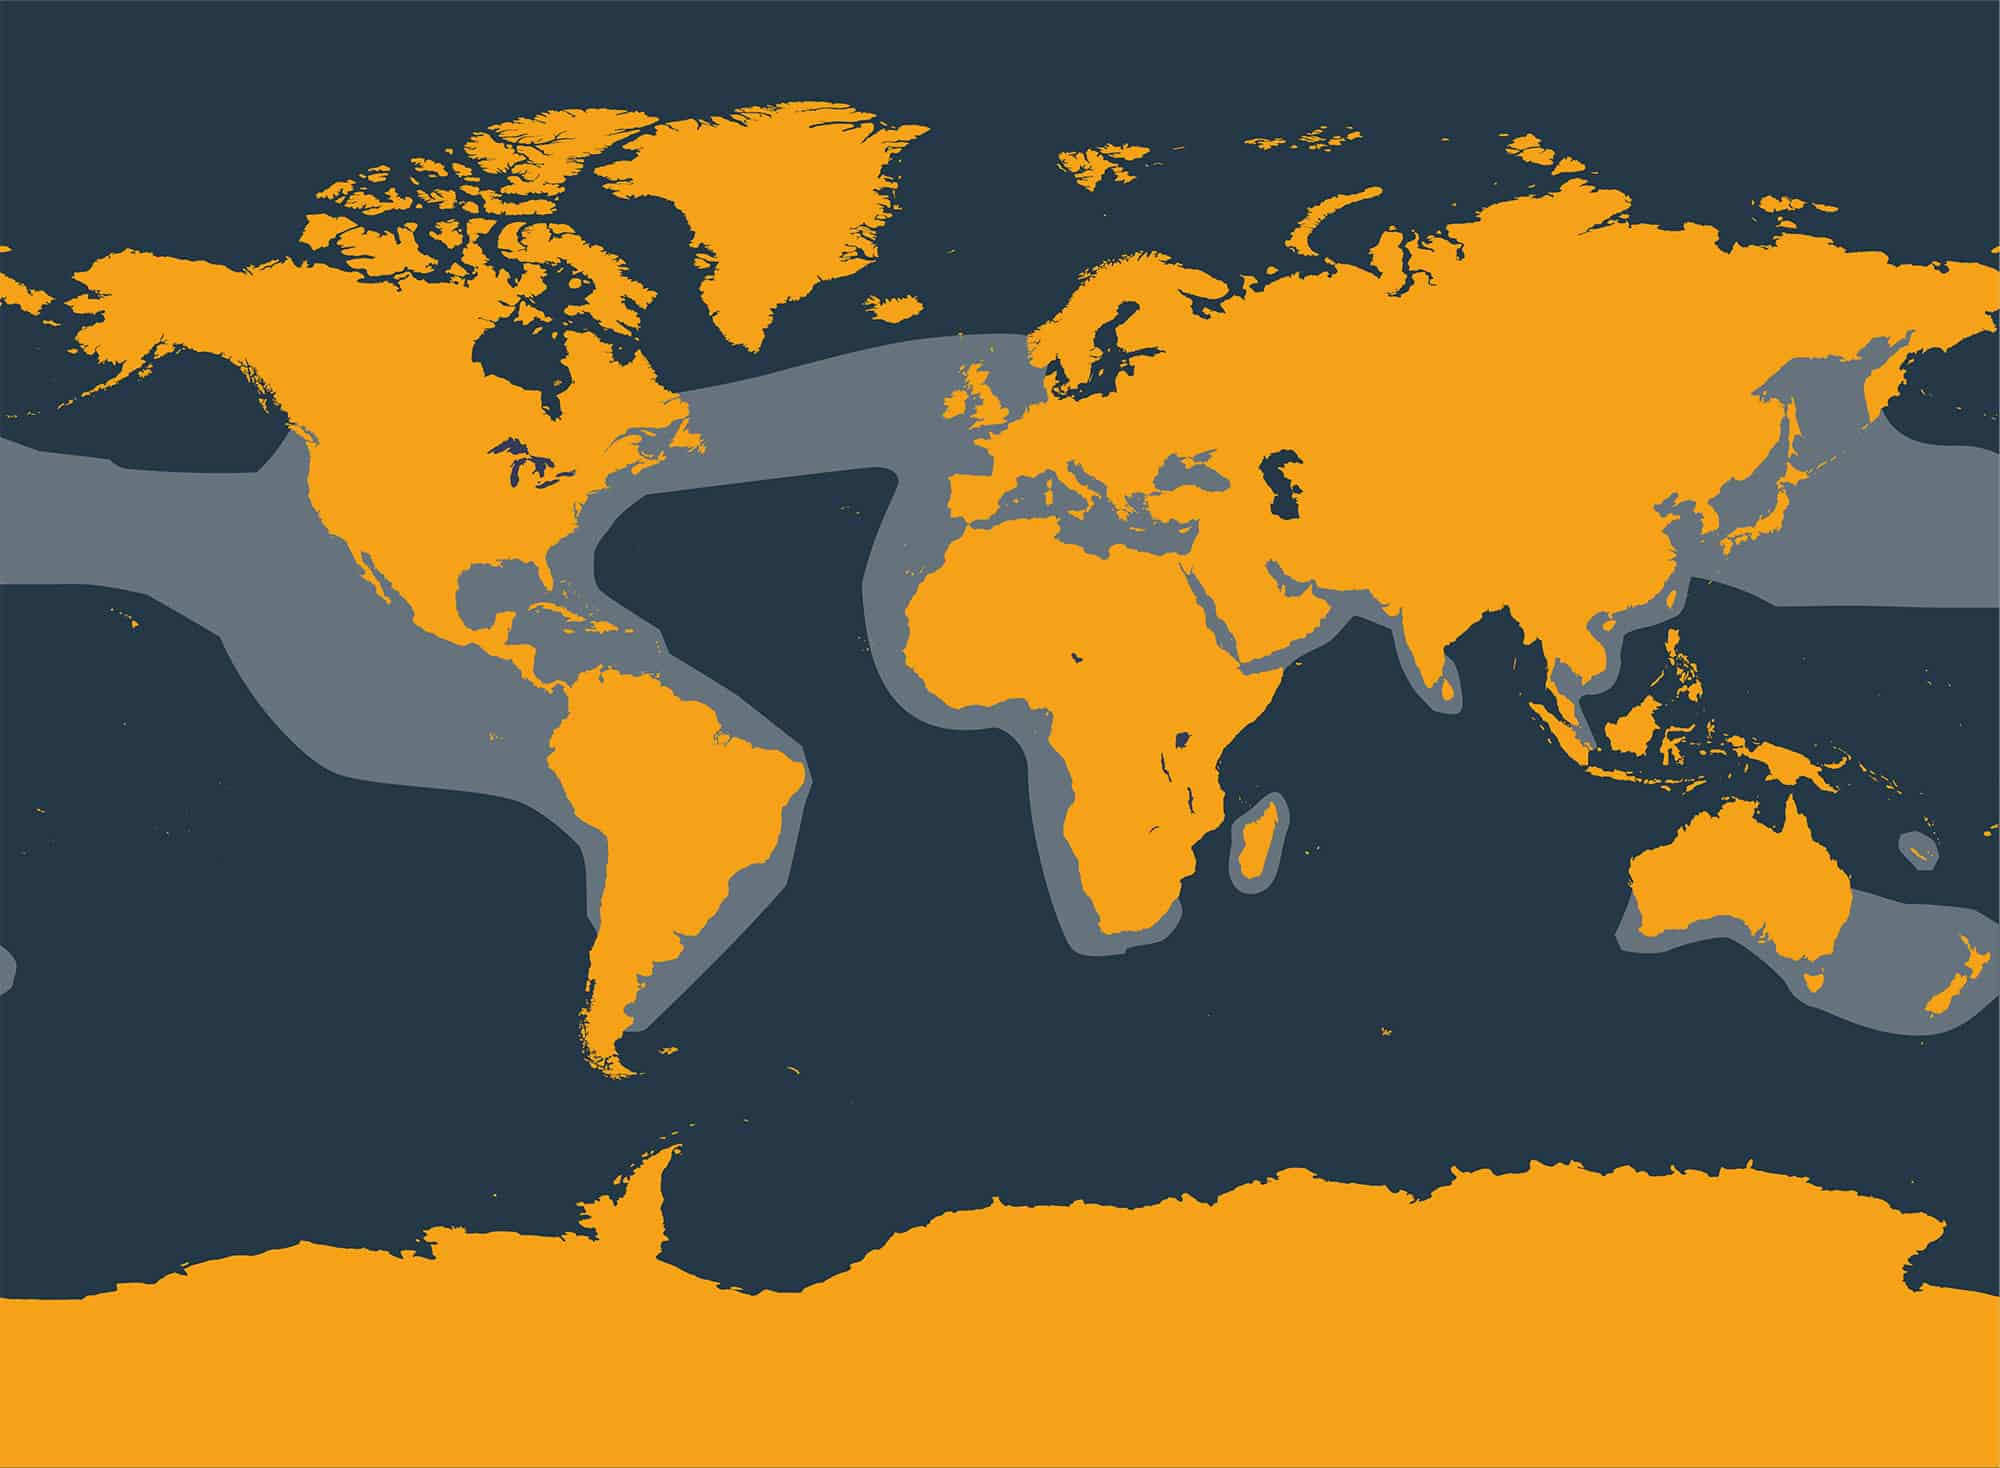 Common dolphin distribution map